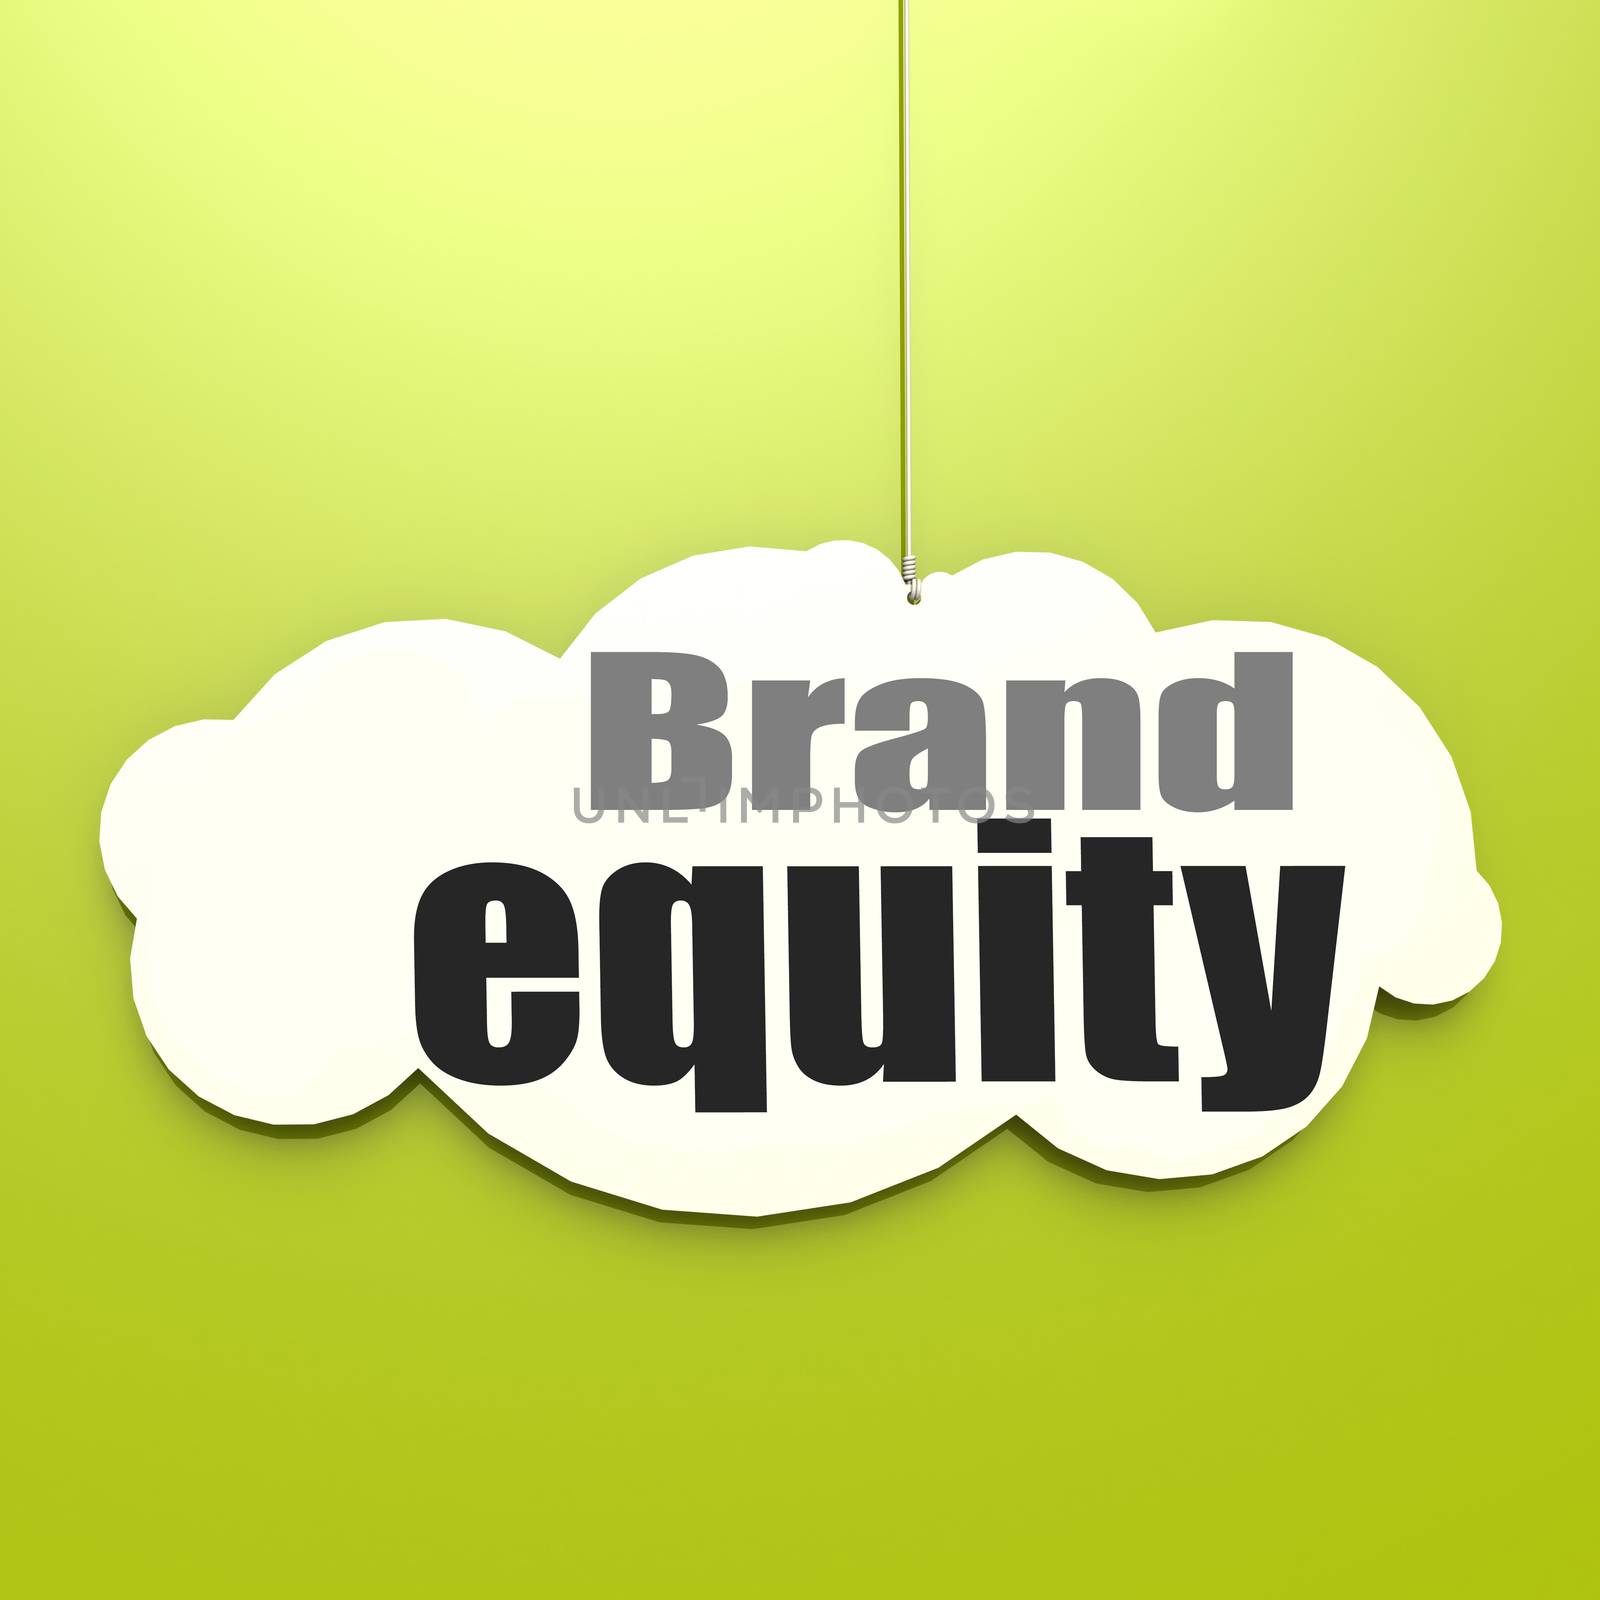 Brand equity word on white cloud with green background, 3D rendering